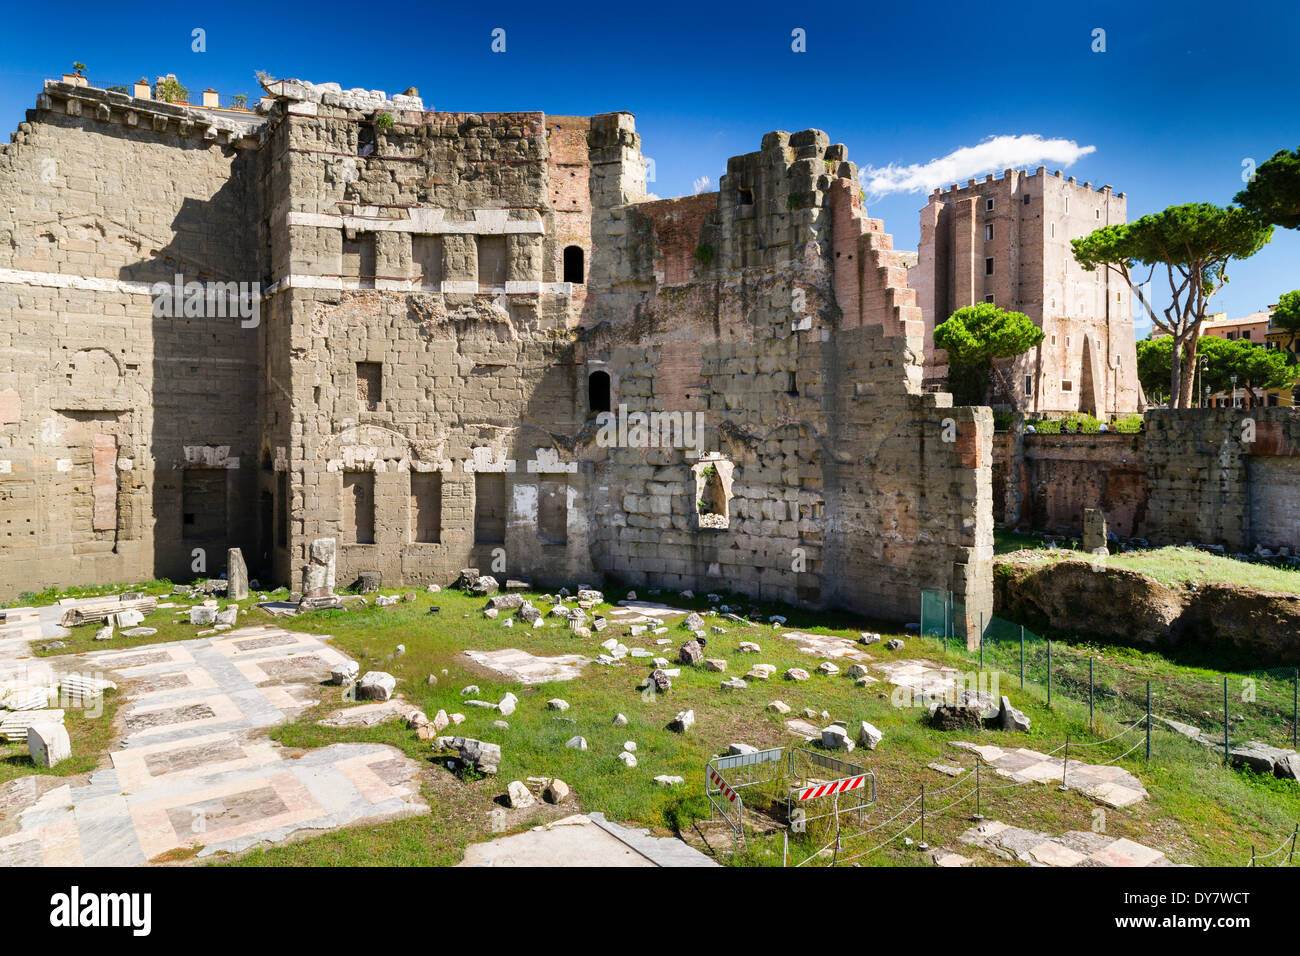 Temple of Mars Ultor, Forum of Augustus, Foro di Augusto, Imperial Forums, Torre dei Conti tower at the back, Rome, Lazio, Italy Stock Photo